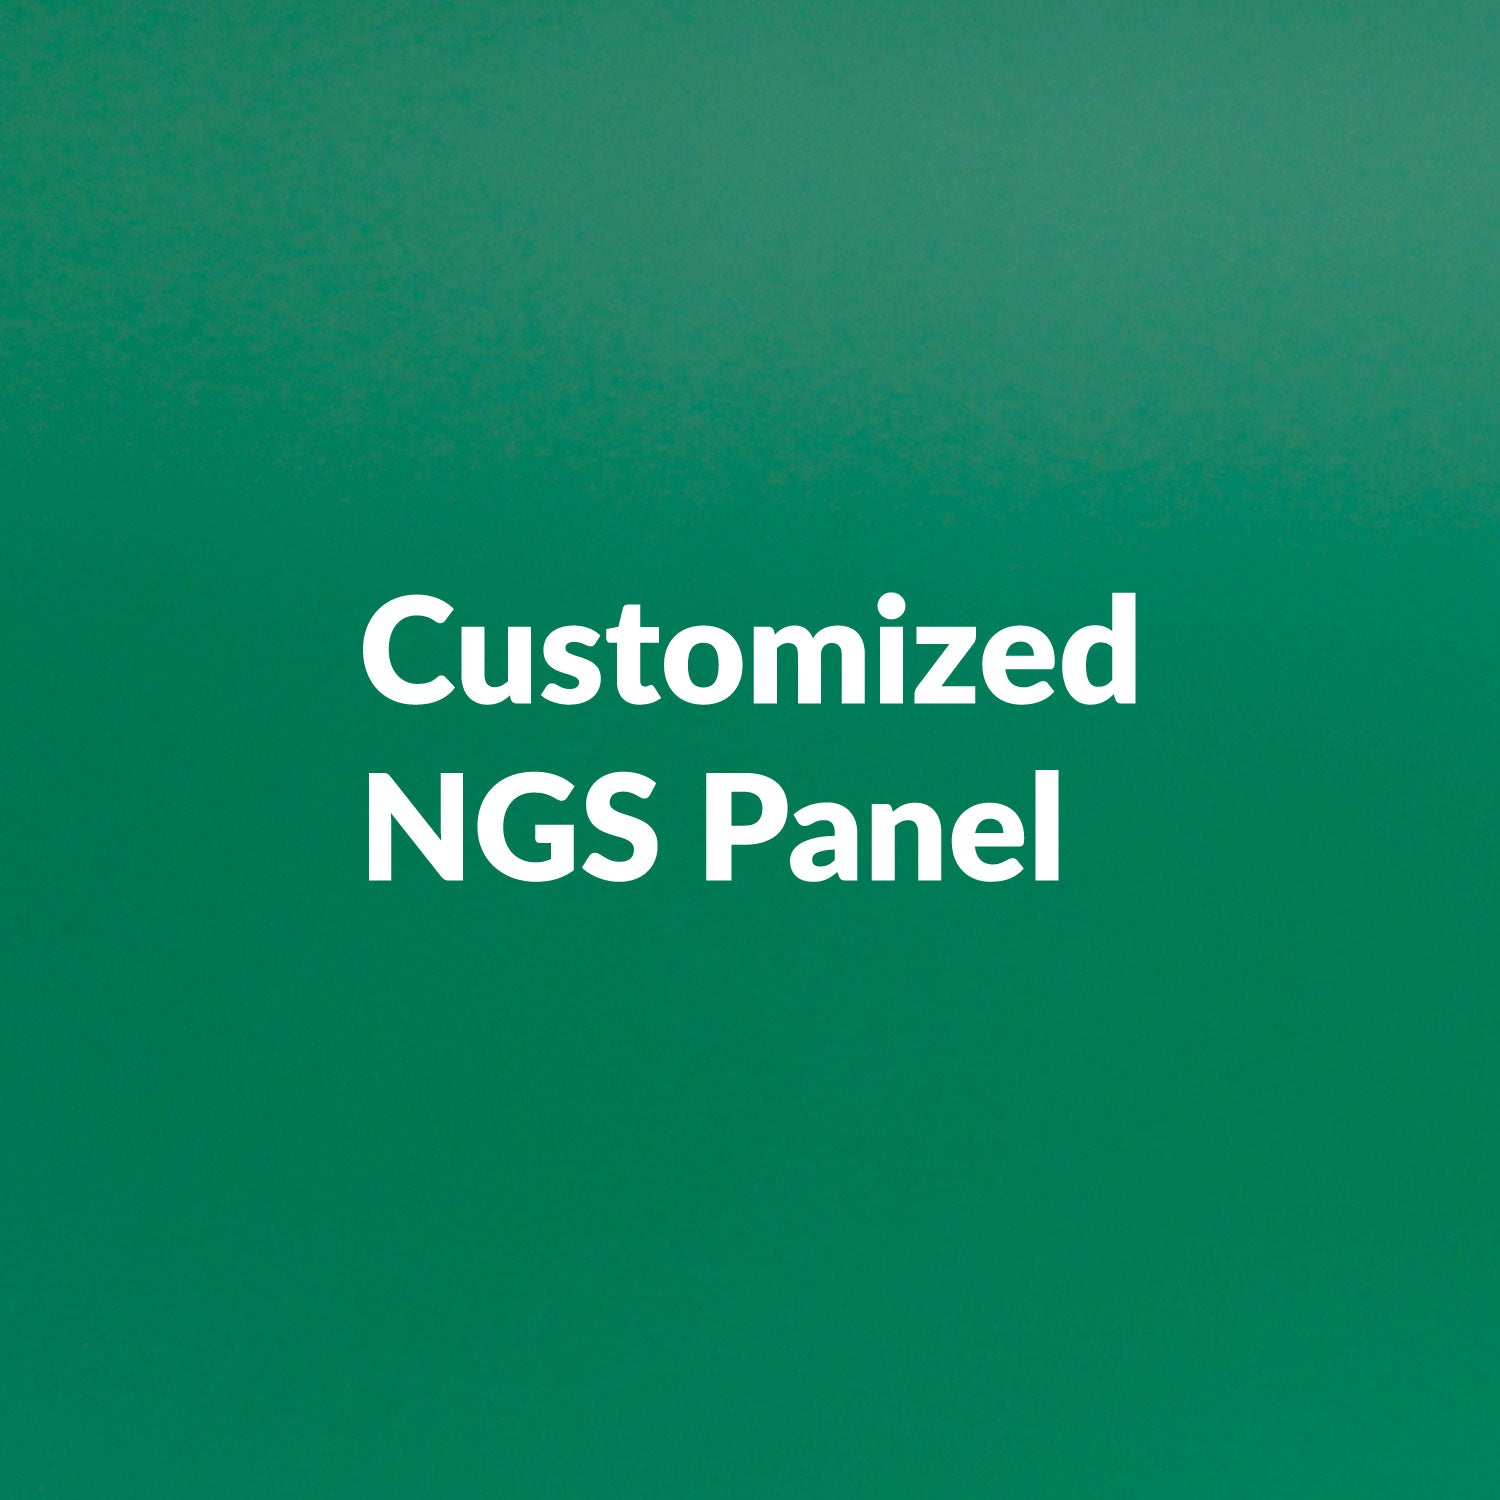 Customized NGS Panel